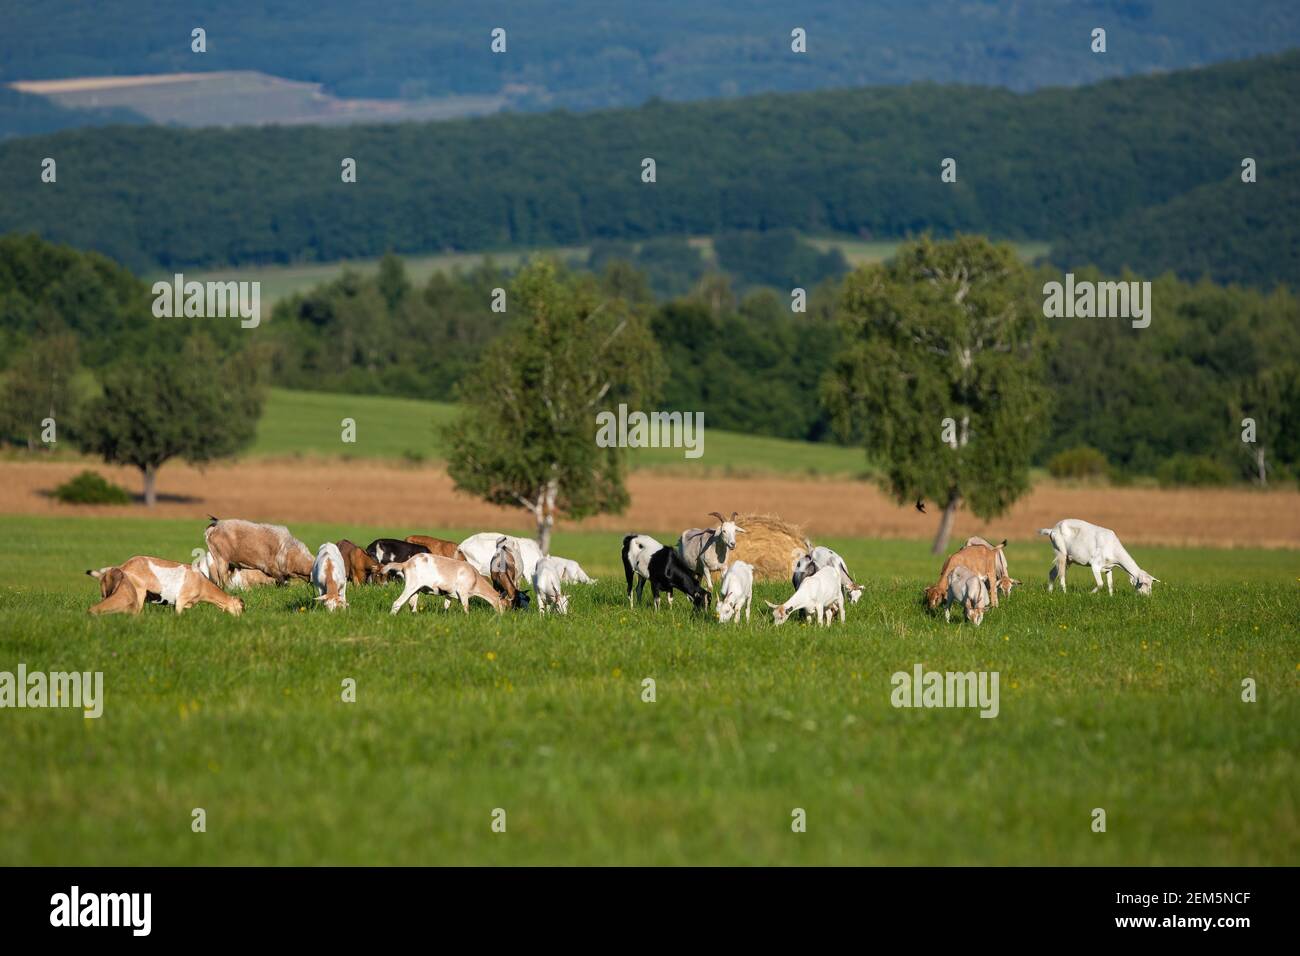 Herd of white and brown goats grazing on a green meadow in summer nature. Stock Photo